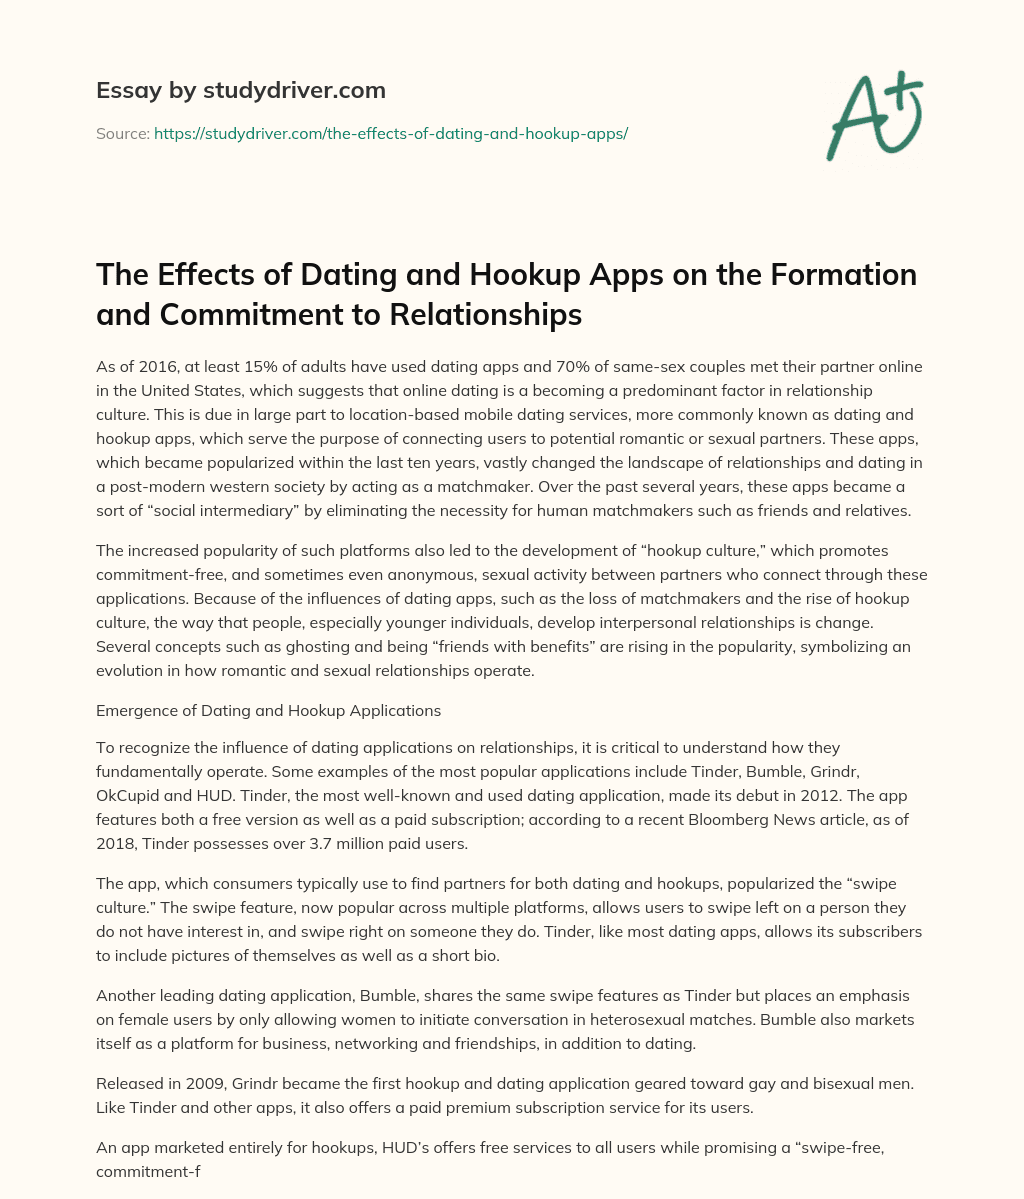 The Effects of Dating and Hookup Apps on the Formation and Commitment to Relationships essay